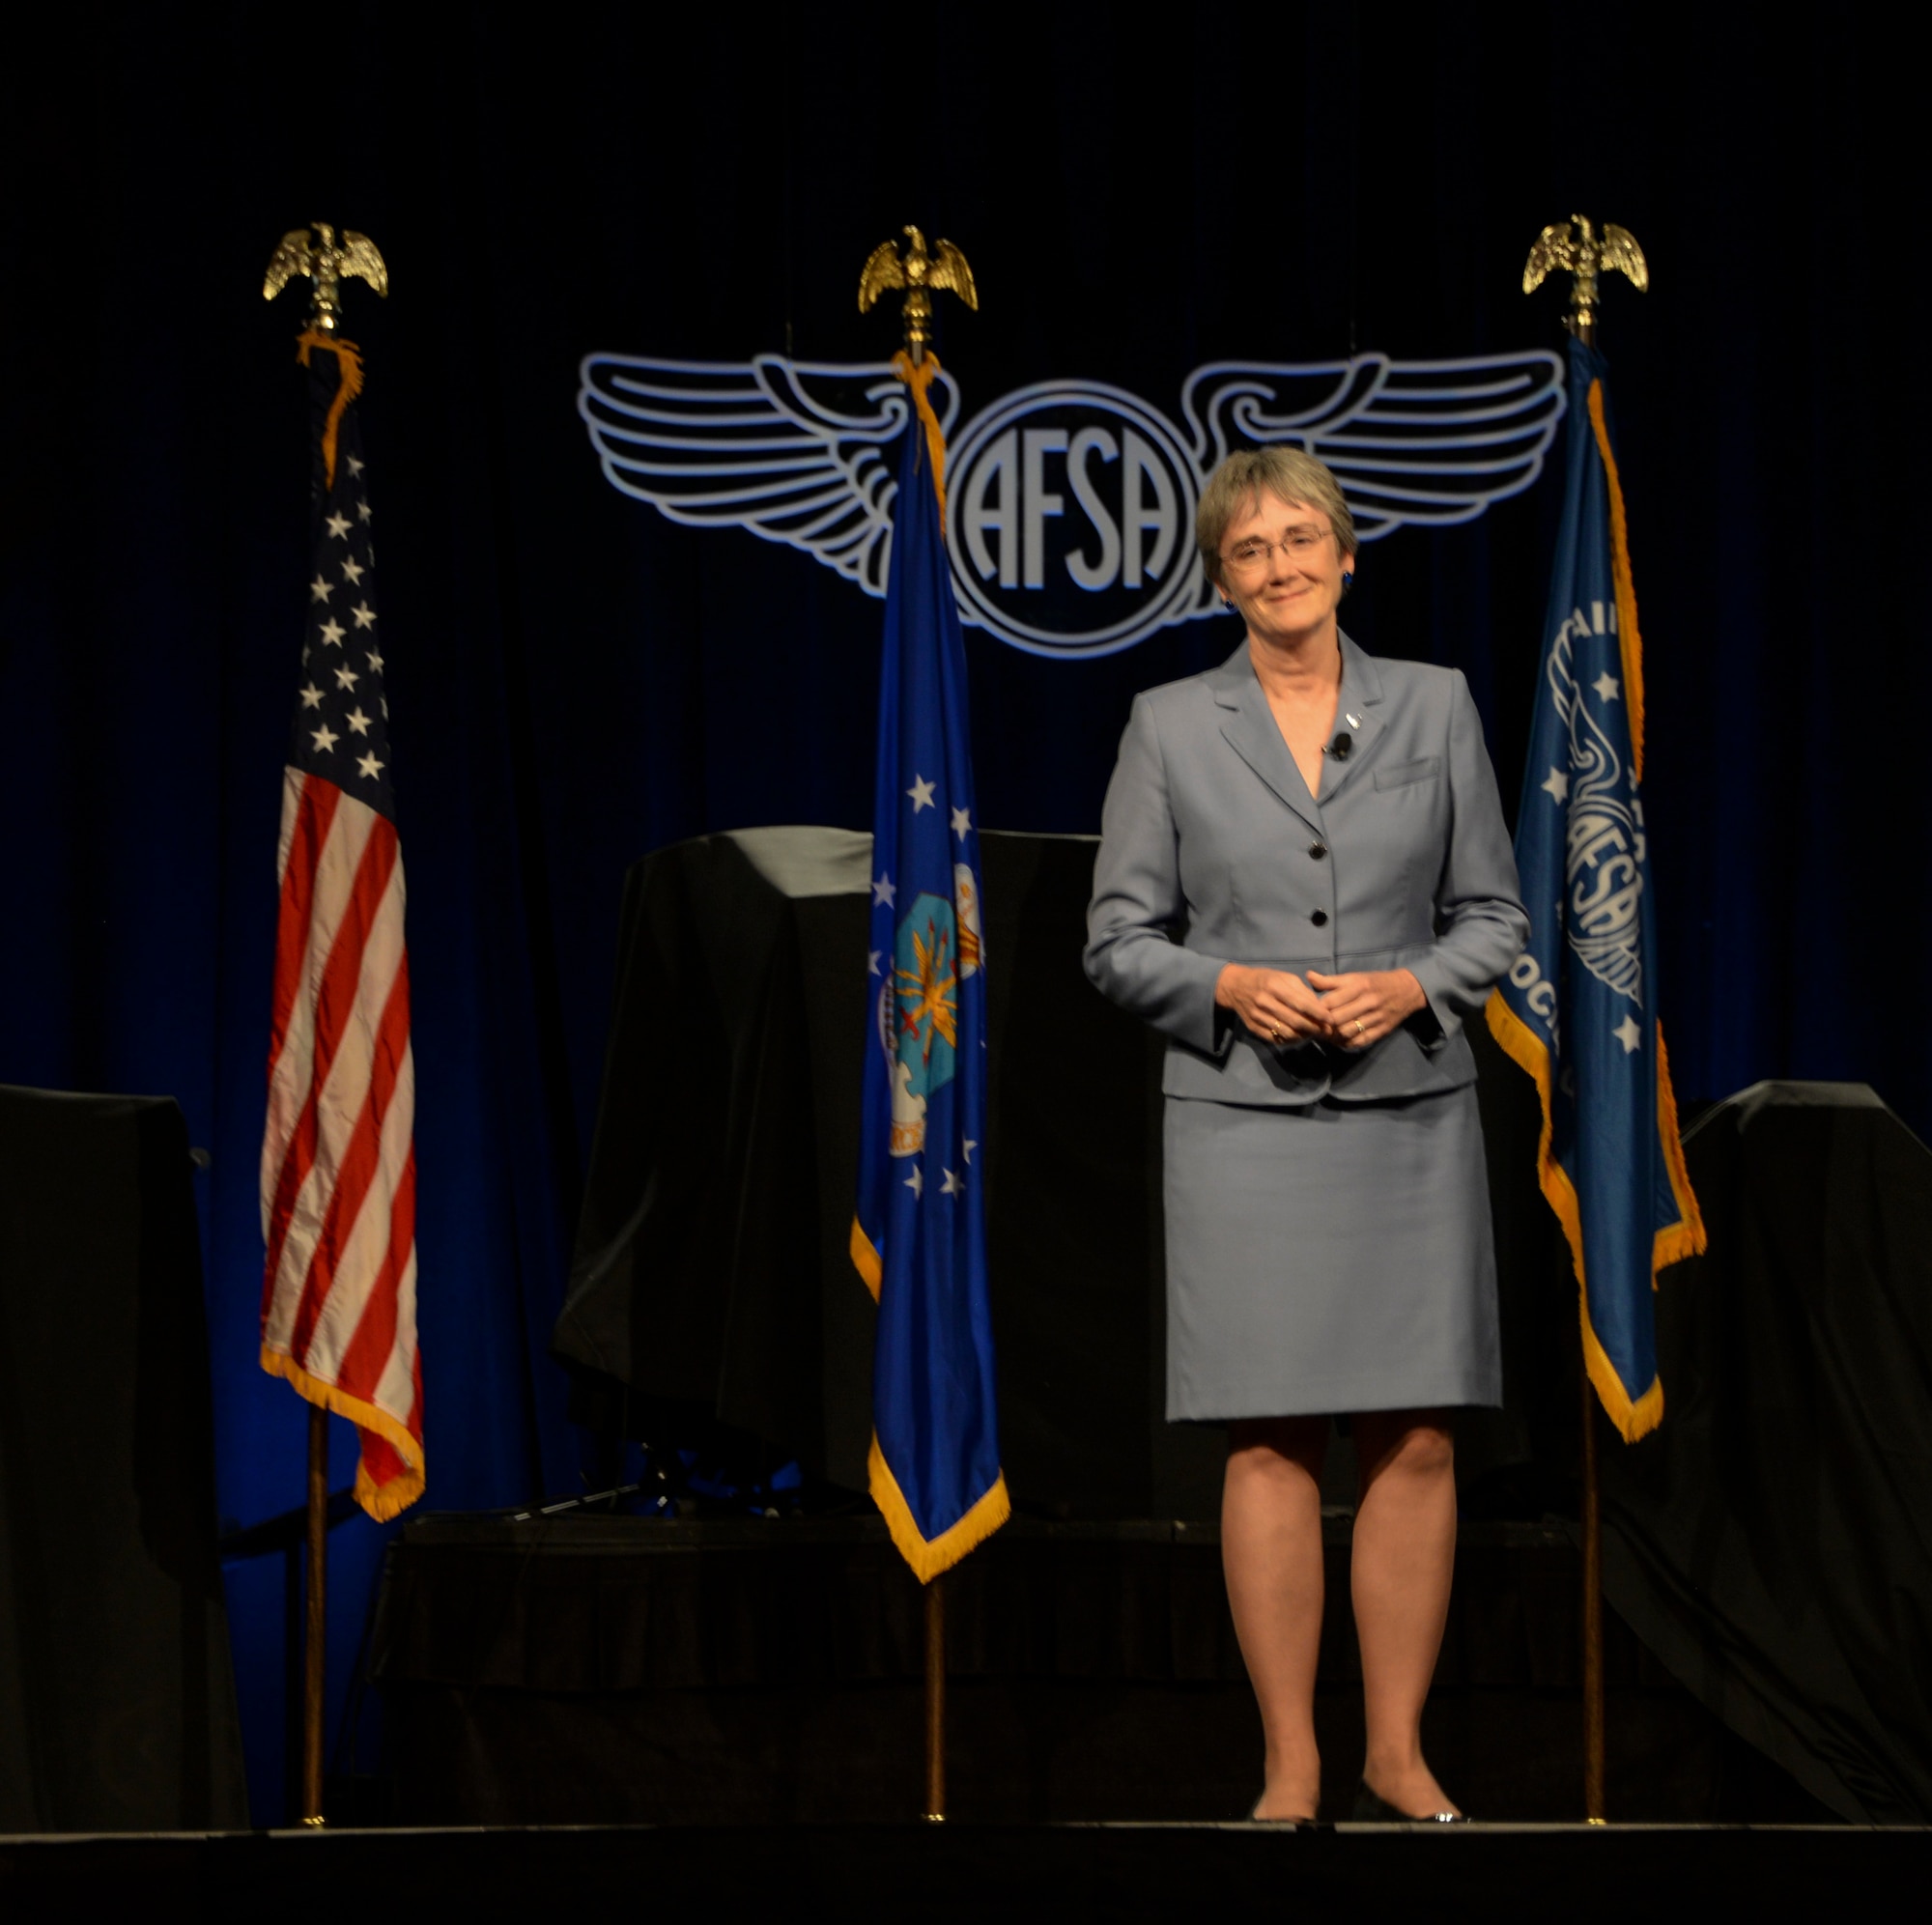 Secretary of the Air Force Heather Wilson speaks at a professional development forum July 25 at the Air Force Sergeants Association International Convention in Reno, Nevada. Wilson spoke about her leadership priorities and the importance of education as well as the development of Airmen. (U.S. Air Force photos by Senior Airman Amber Carter)